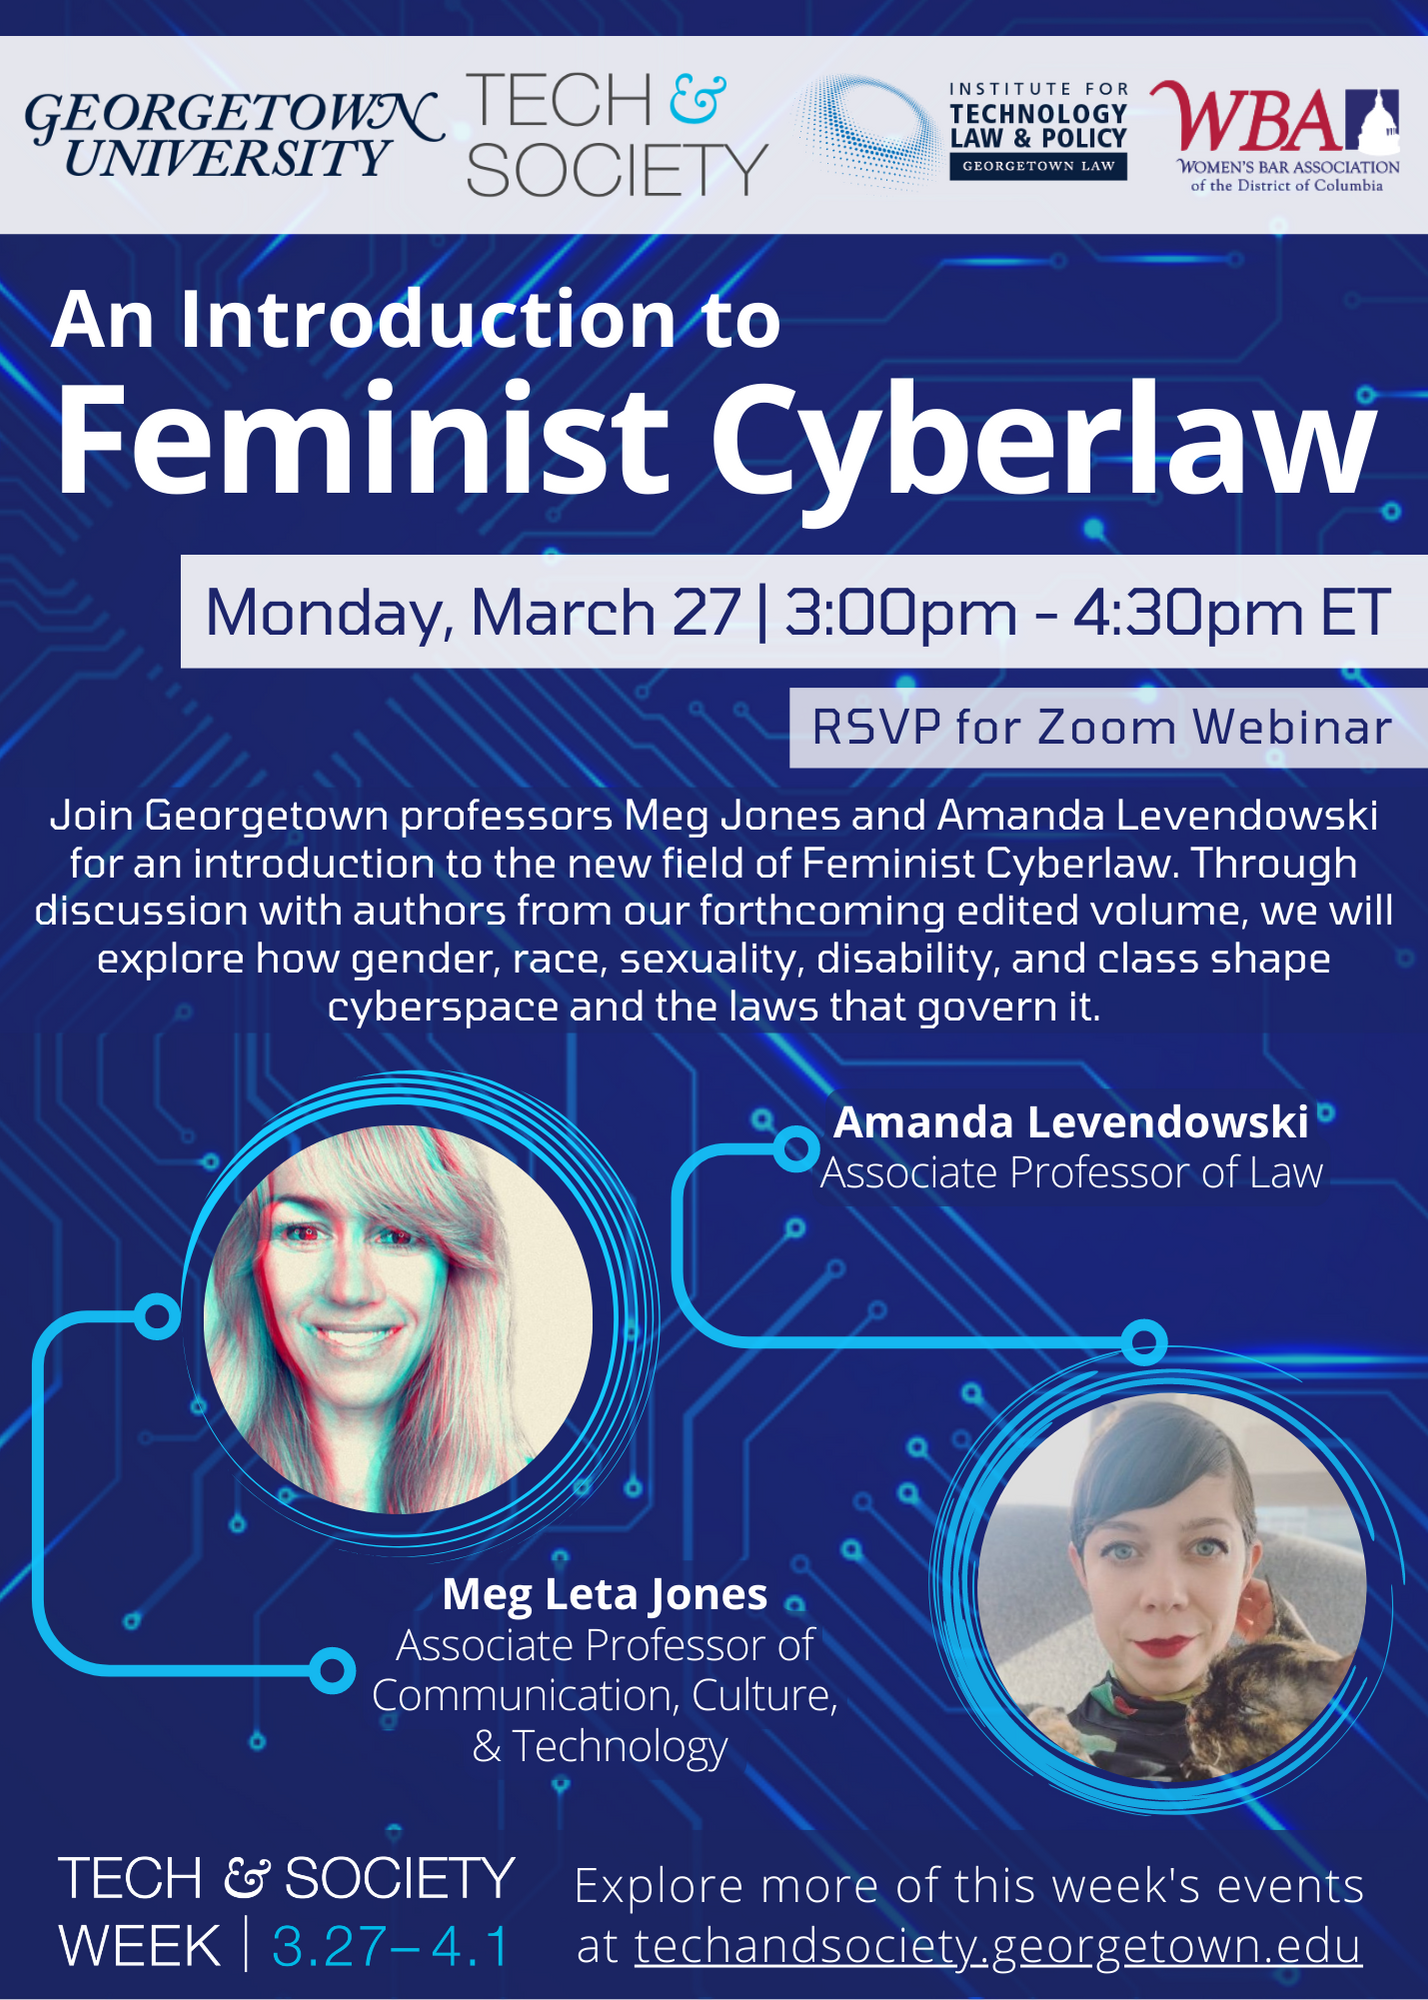 An Introduction to Feminist Cyberlaw Zoom Webinar